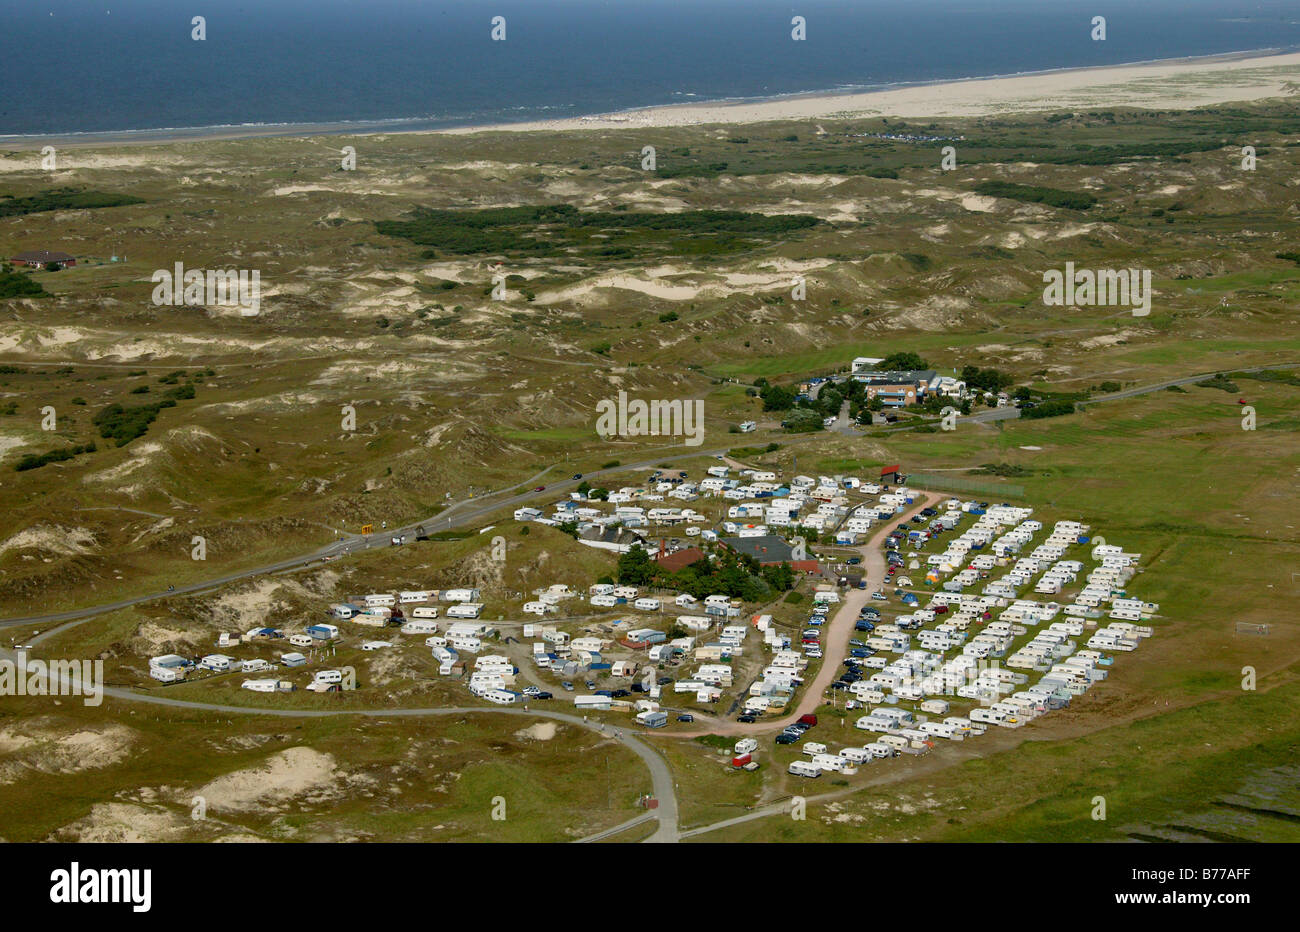 Aerial view, island campsite, Norderney Island, North Sea, East Frisian Islands, Lower Saxony, North Germany, Europe Stock Photo